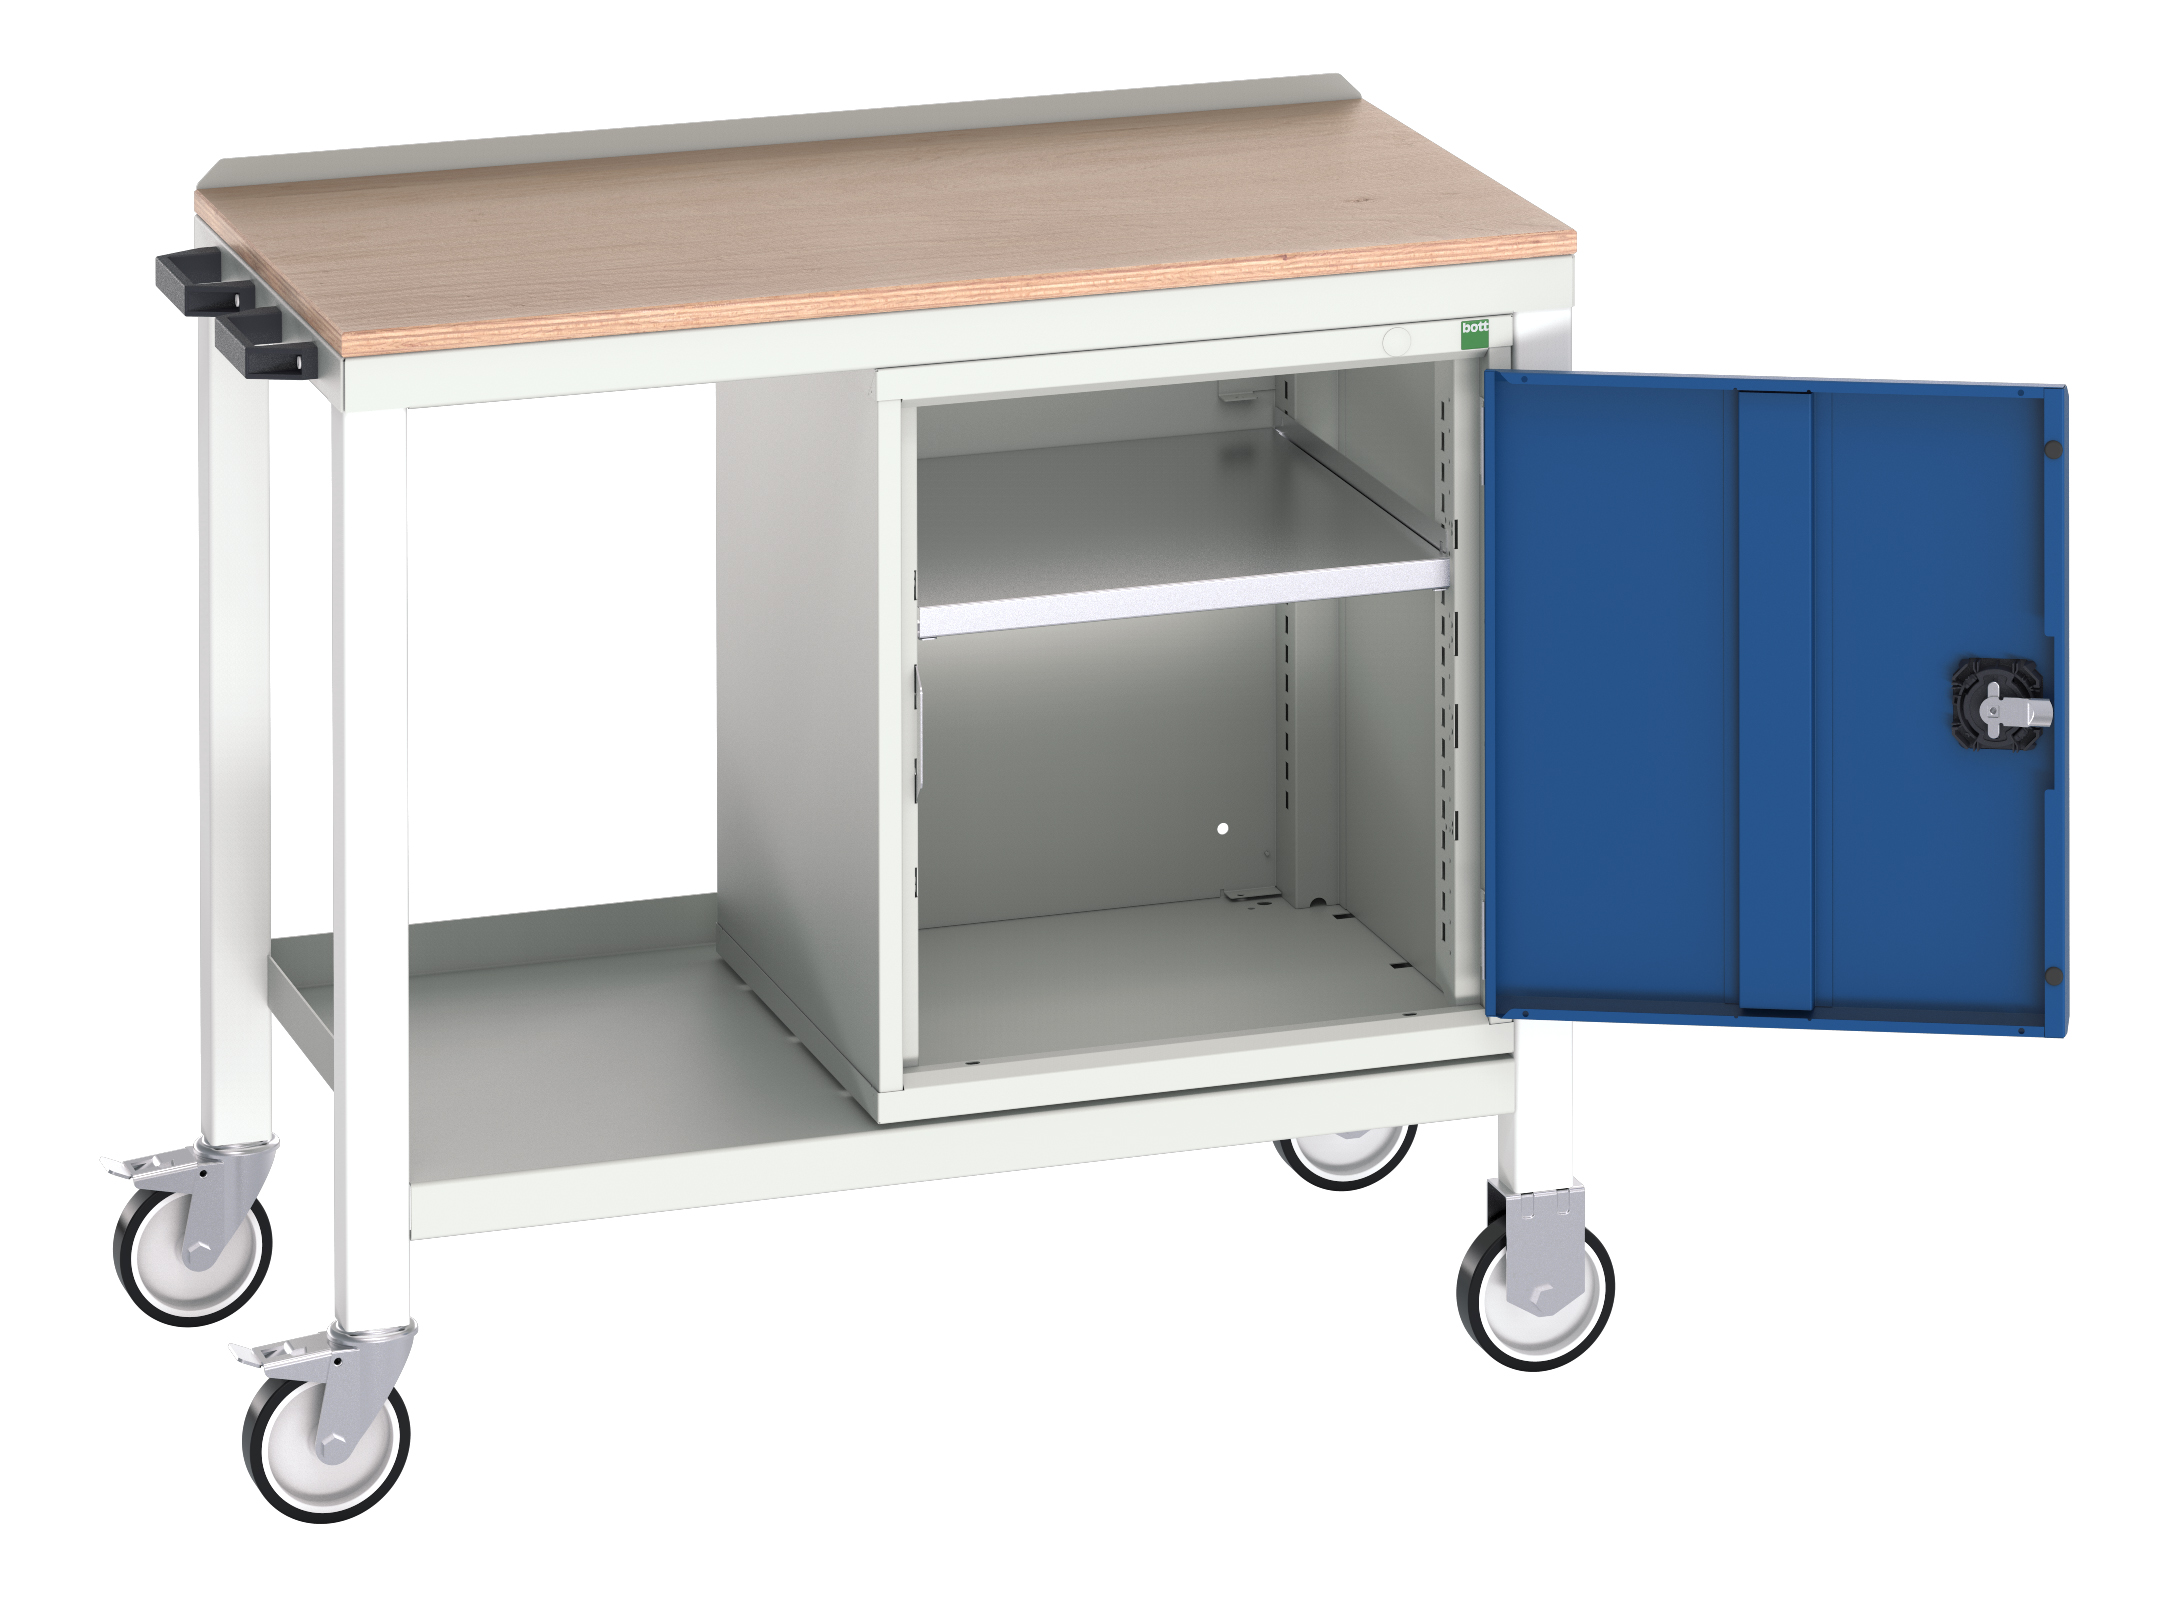 Bott Verso Mobile Welded Bench With Full Cupboard - 16922803.11